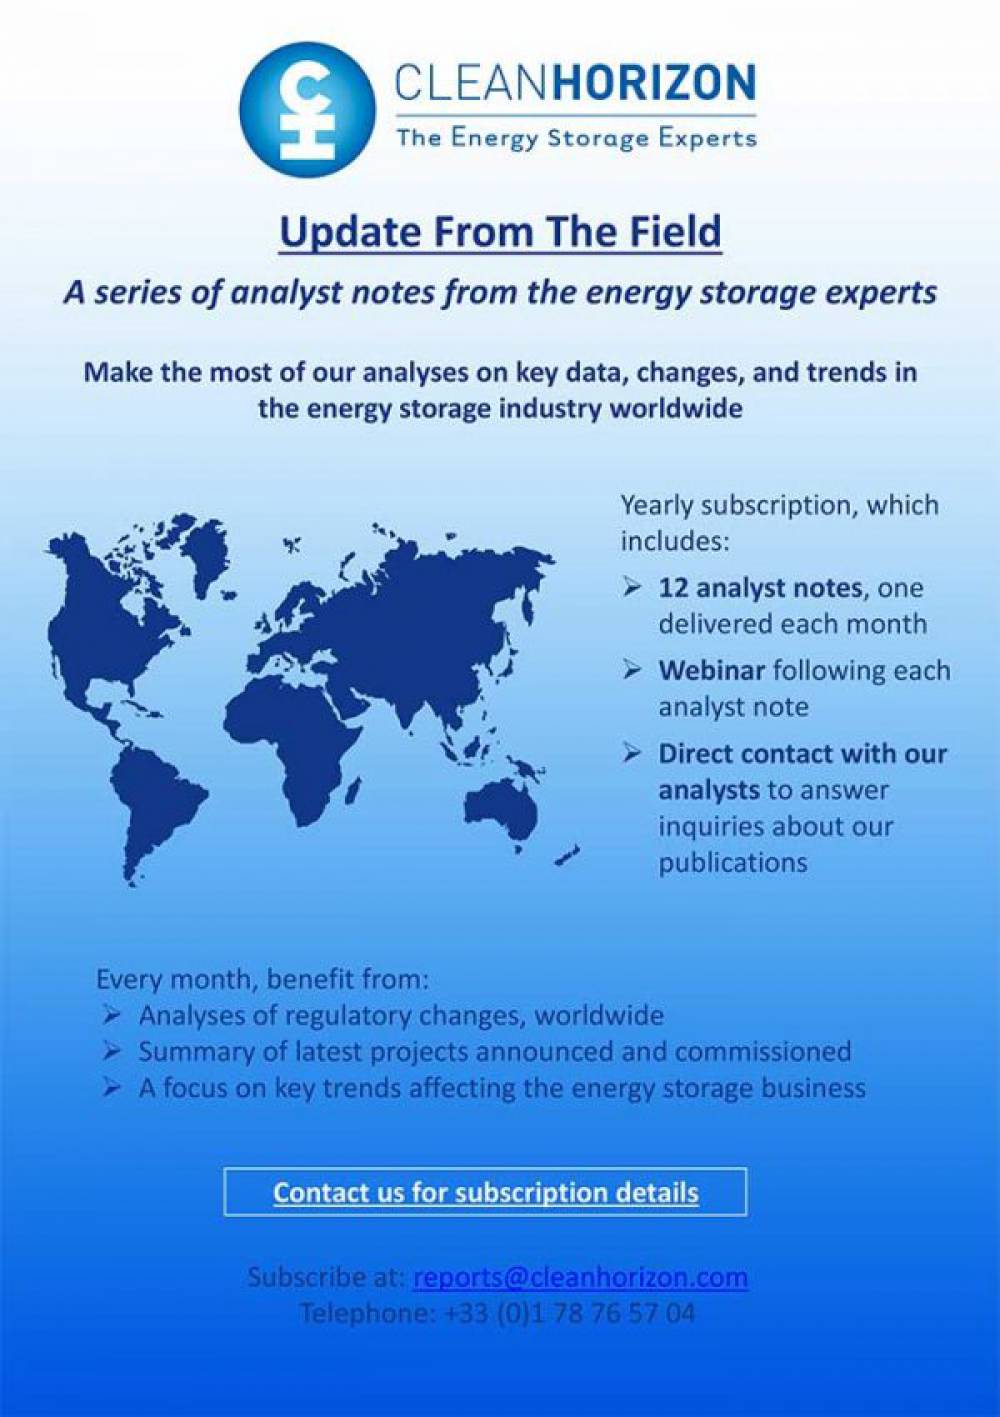 Update From The Field November 2018: Energy storage opportunities arising in Mexico